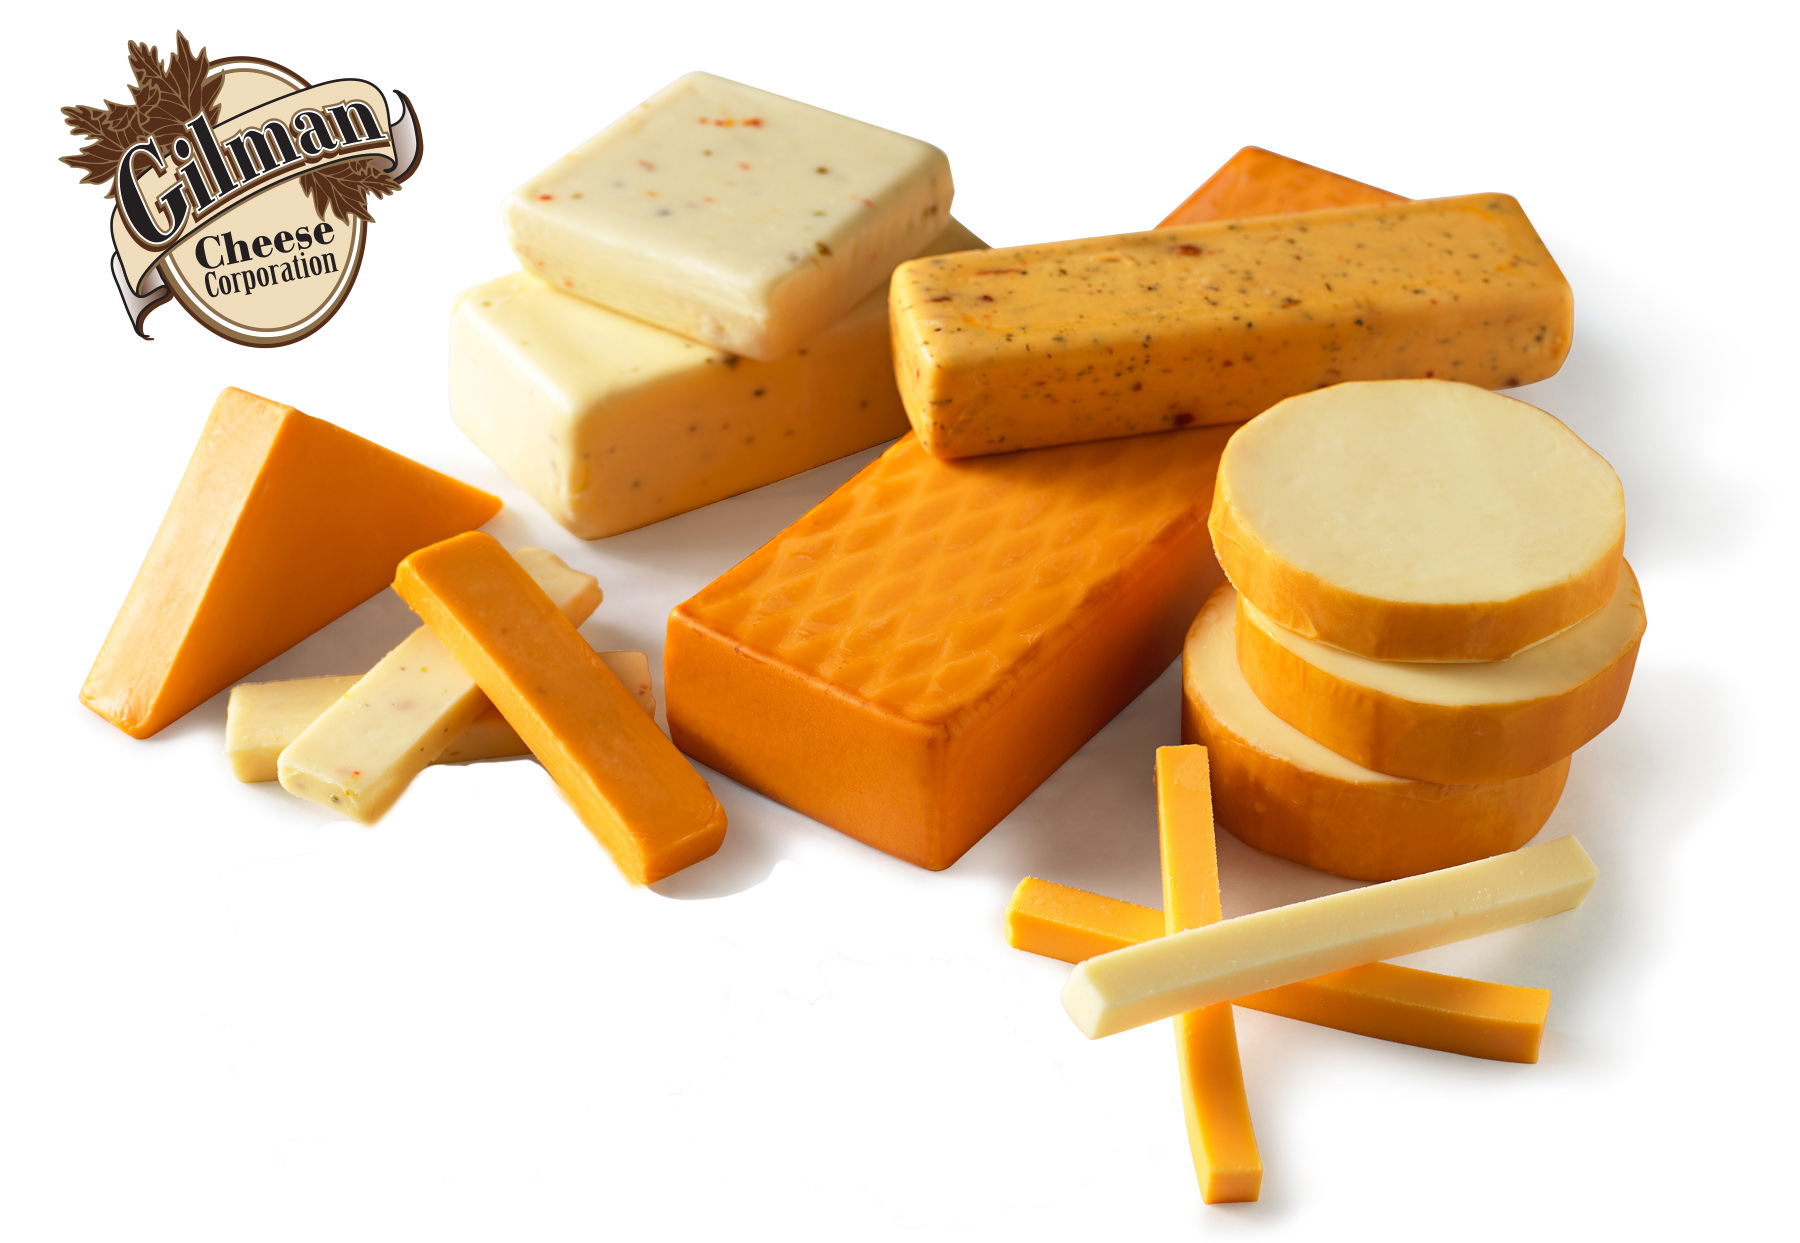 gilman cheese offers many cheese shapes and sizes